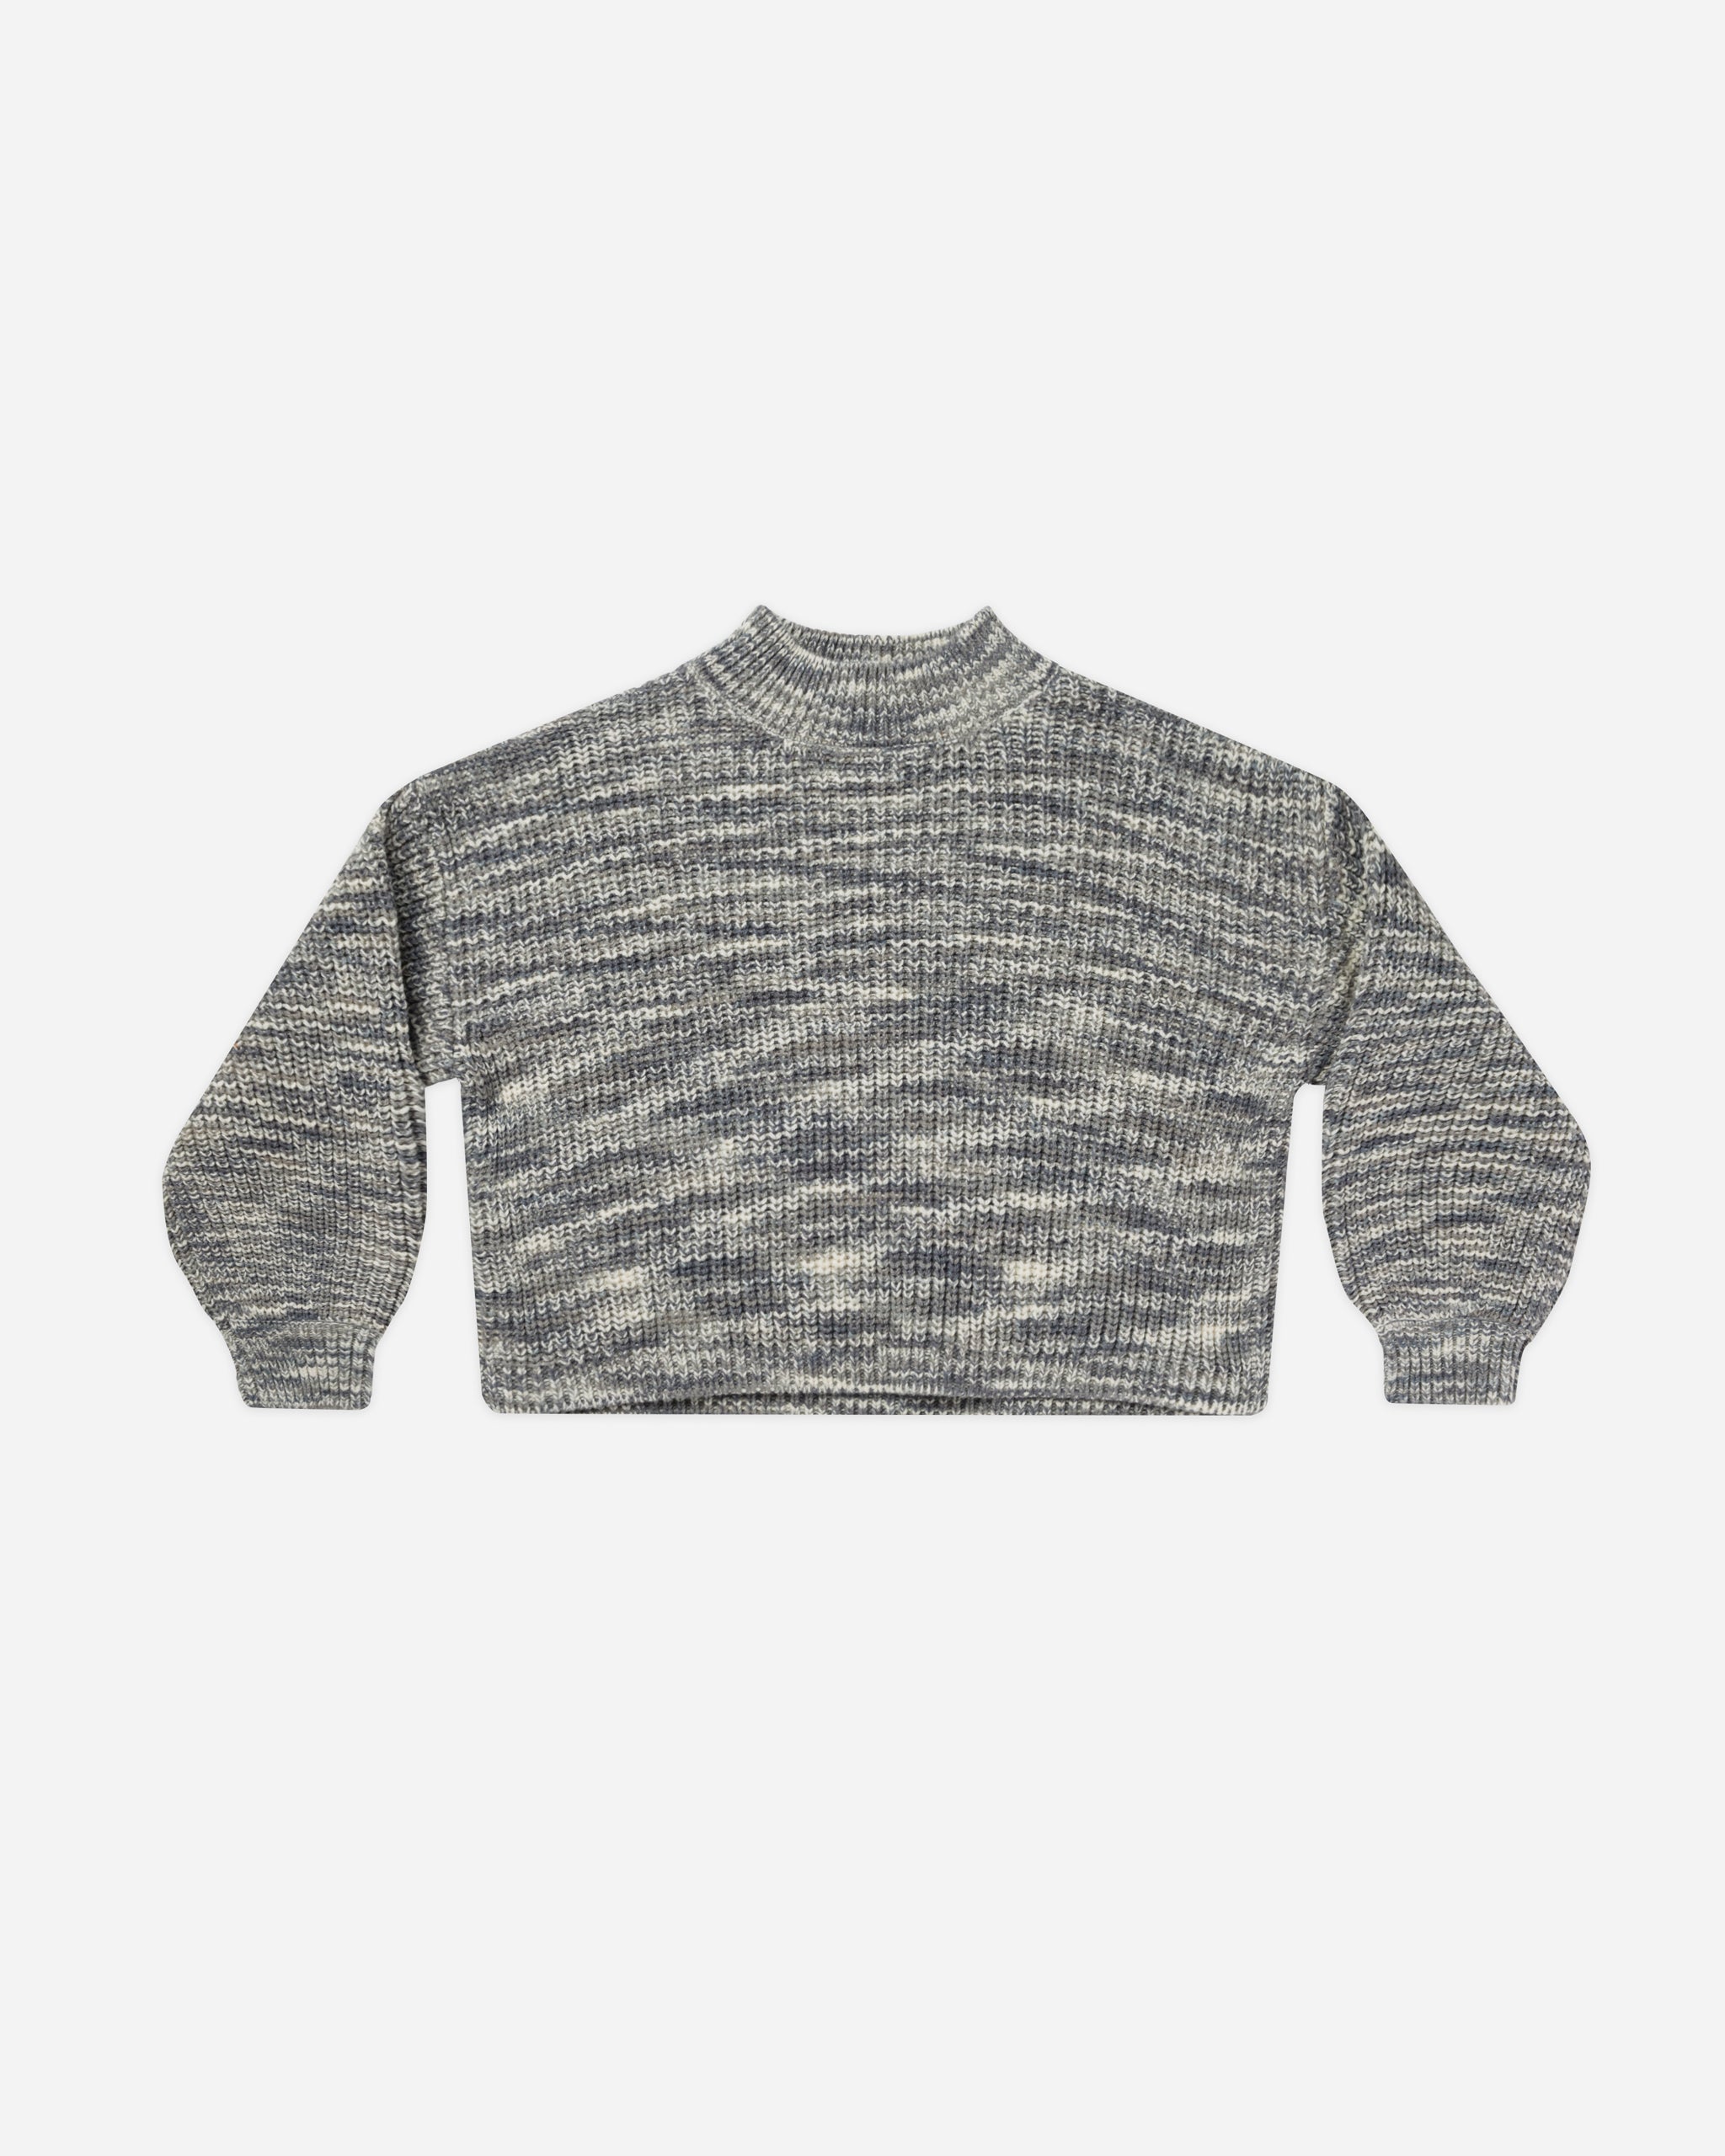 Knit Sweater || Heathered Slate - Rylee + Cru | Kids Clothes | Trendy Baby Clothes | Modern Infant Outfits |